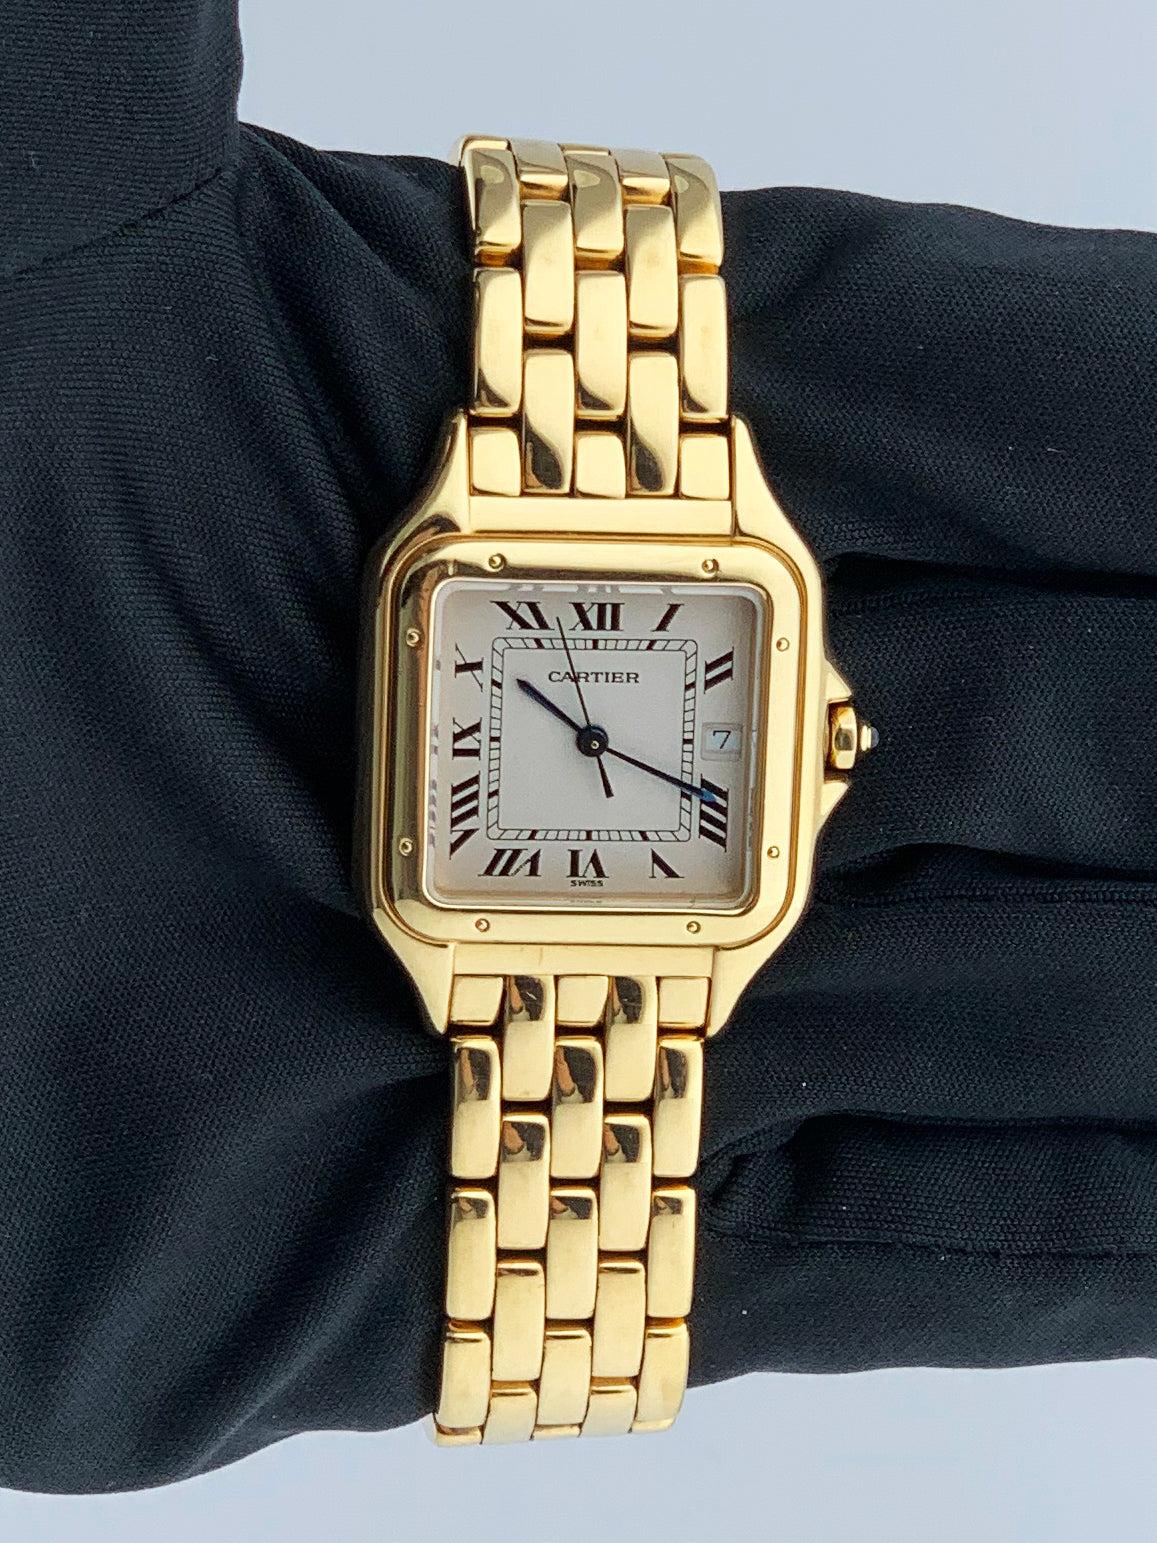 Cartier Panthere Large Mens Watch. 28mm 18K yellow gold case with 18K yellow gold smooth bezel. Off-White dial with Blue steel hands and black Roman numeral hour markers. Minute markers on the inner dial. Date display at the 3 o'clock position. 18k